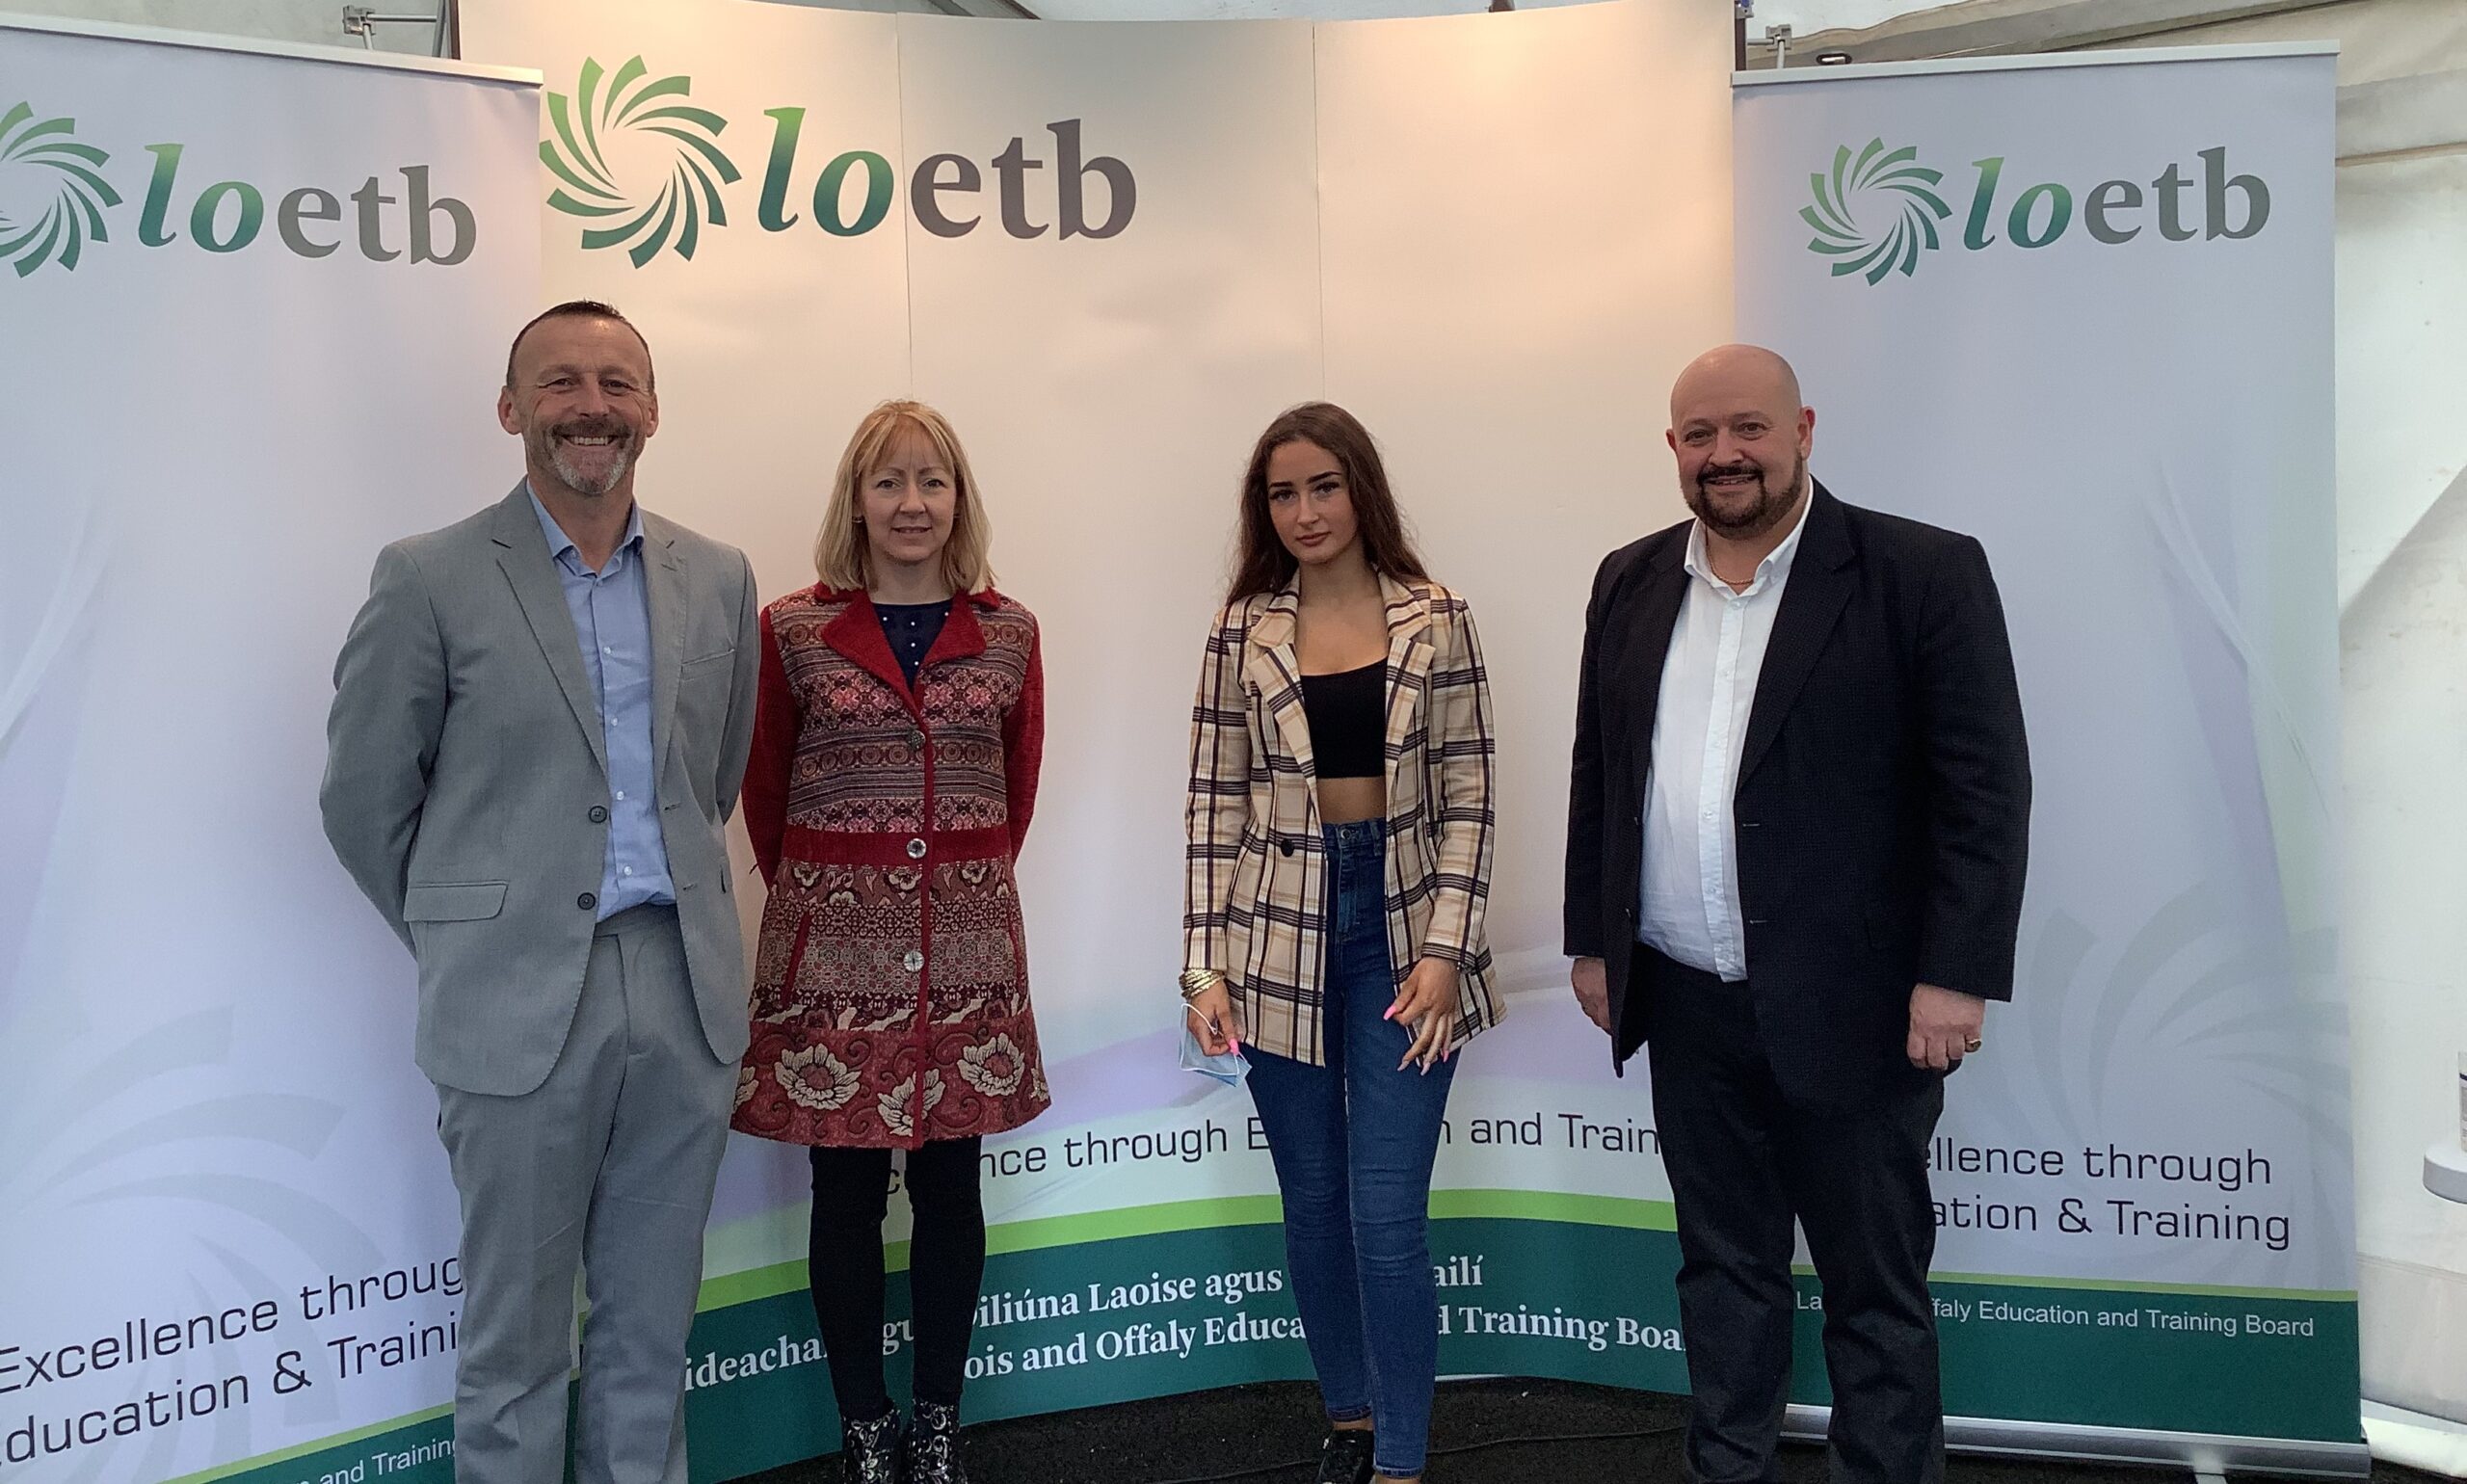 Tony Dalton (LOETB Director, Further Education and Training), Eileen Dunne (LOETB Inclusion Manager), Annalisha Ward (Singer) and Dermot Muldowney (Manager of LOETB Mountmellick FET Centre)